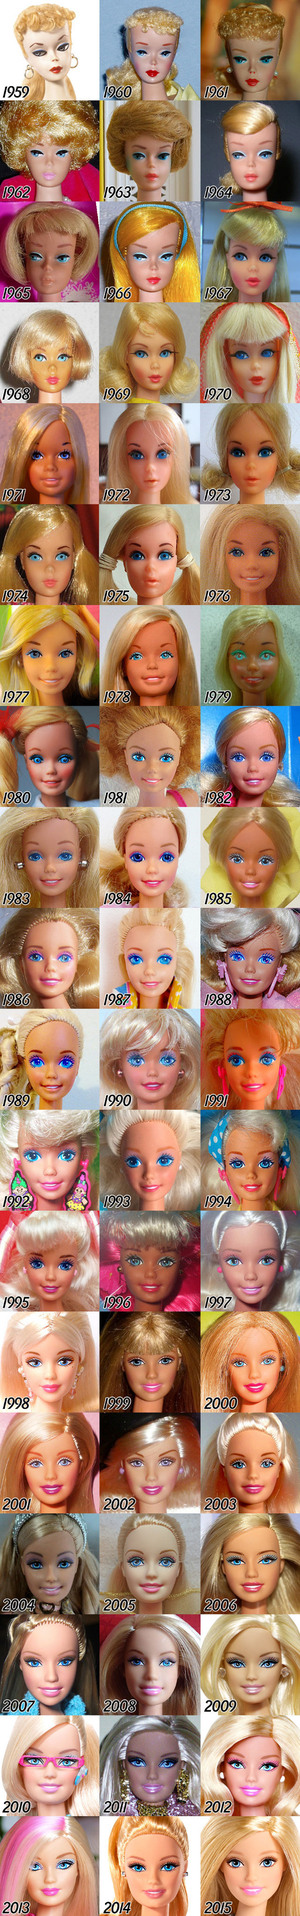 The-Evolution-of-Barbie-s-Face-19592015